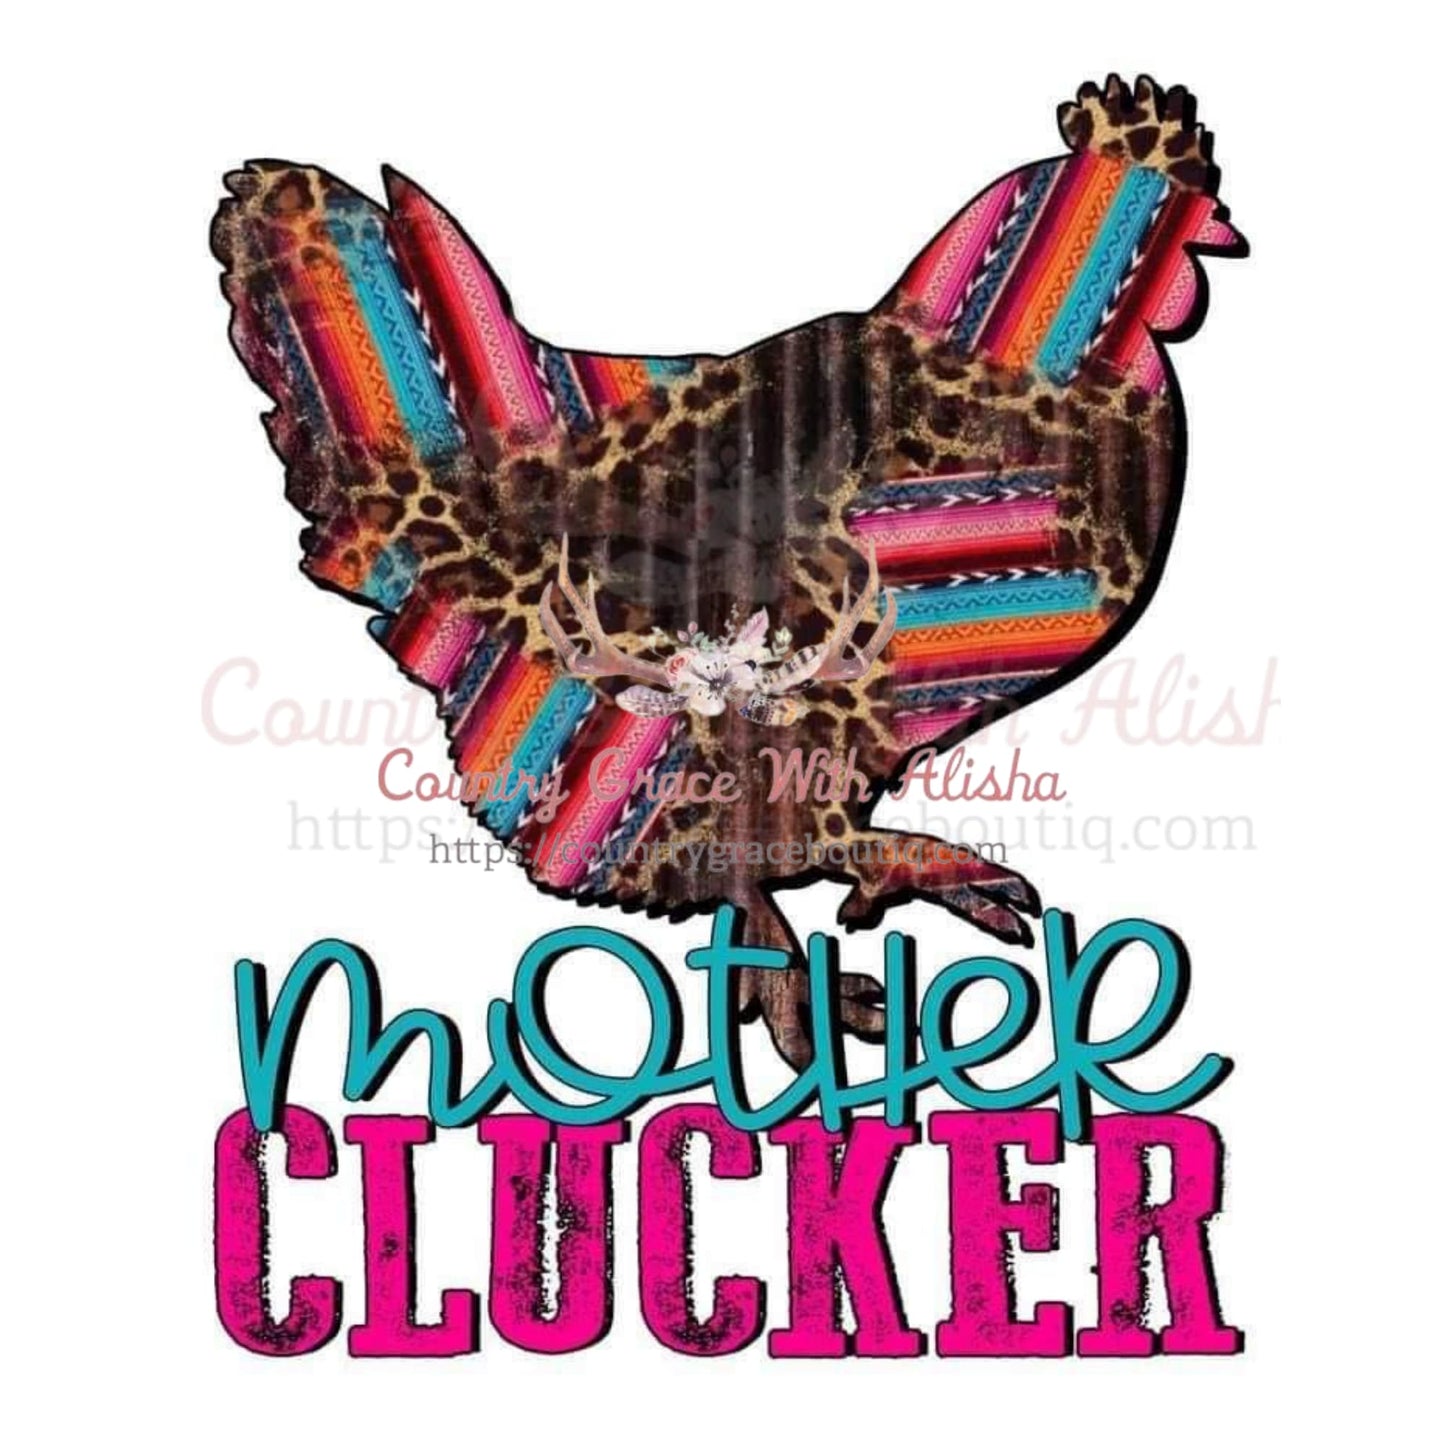 Mother Clucker Chicken Sublimation Transfer - Sub $1.50 